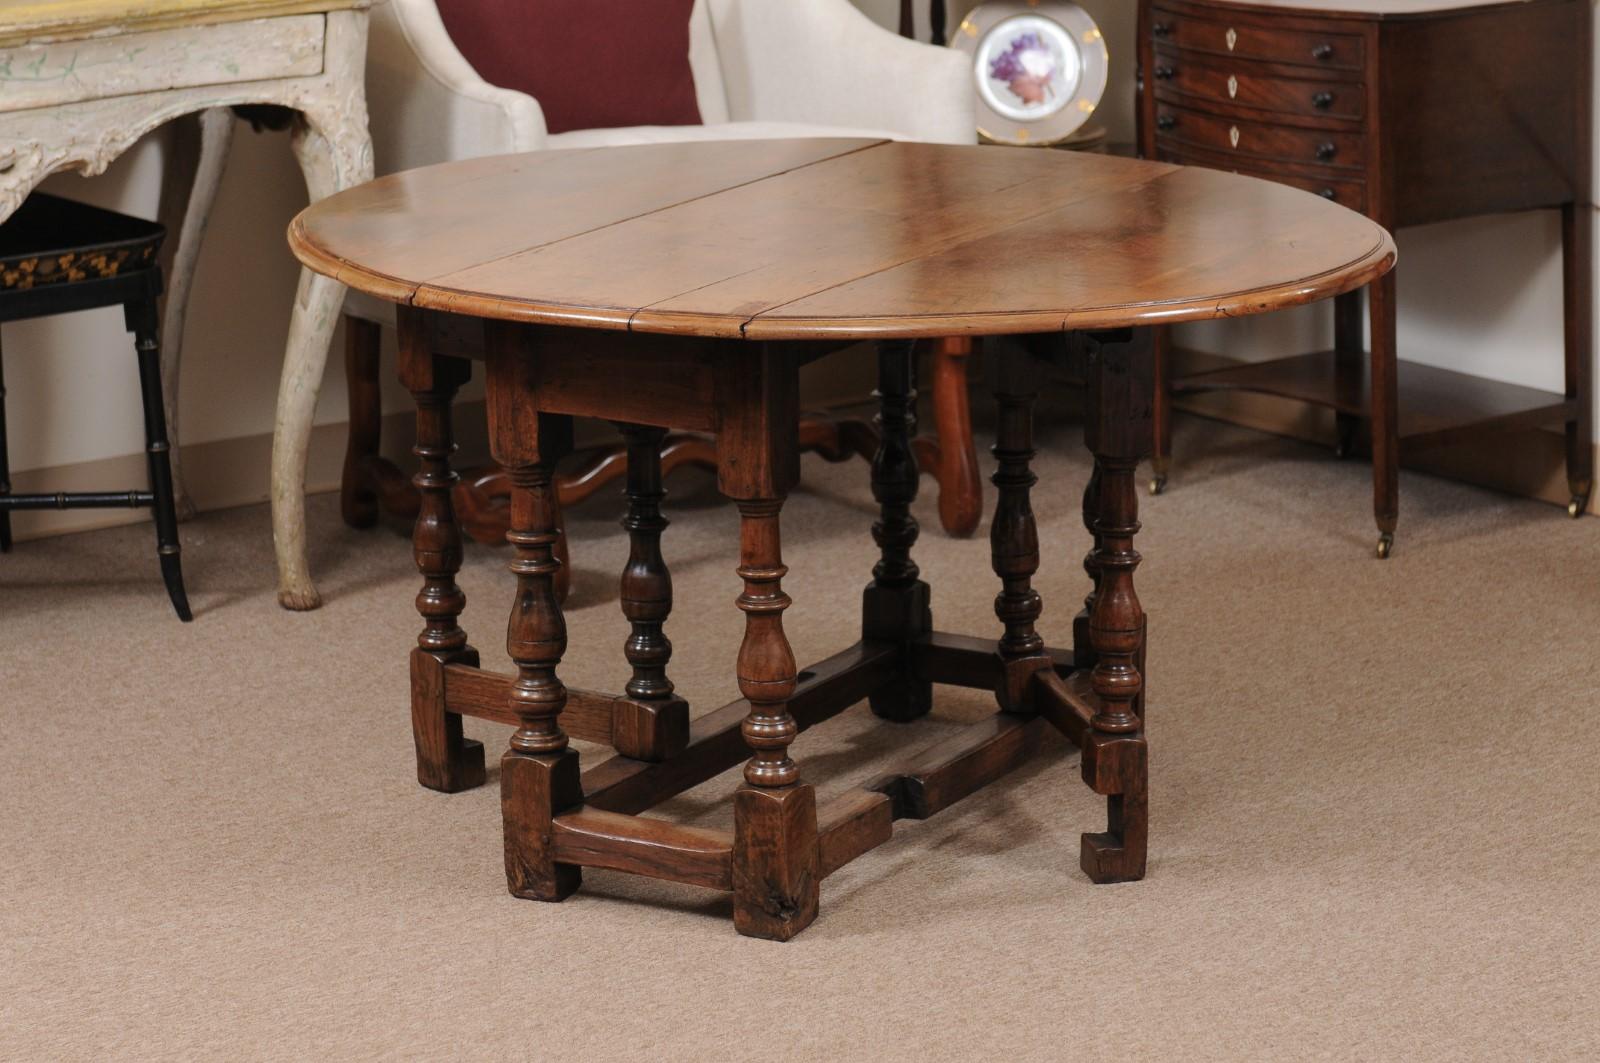 18th Century English Walnut Gate Leg Table with Drop Leaves & Turned Legs For Sale 3